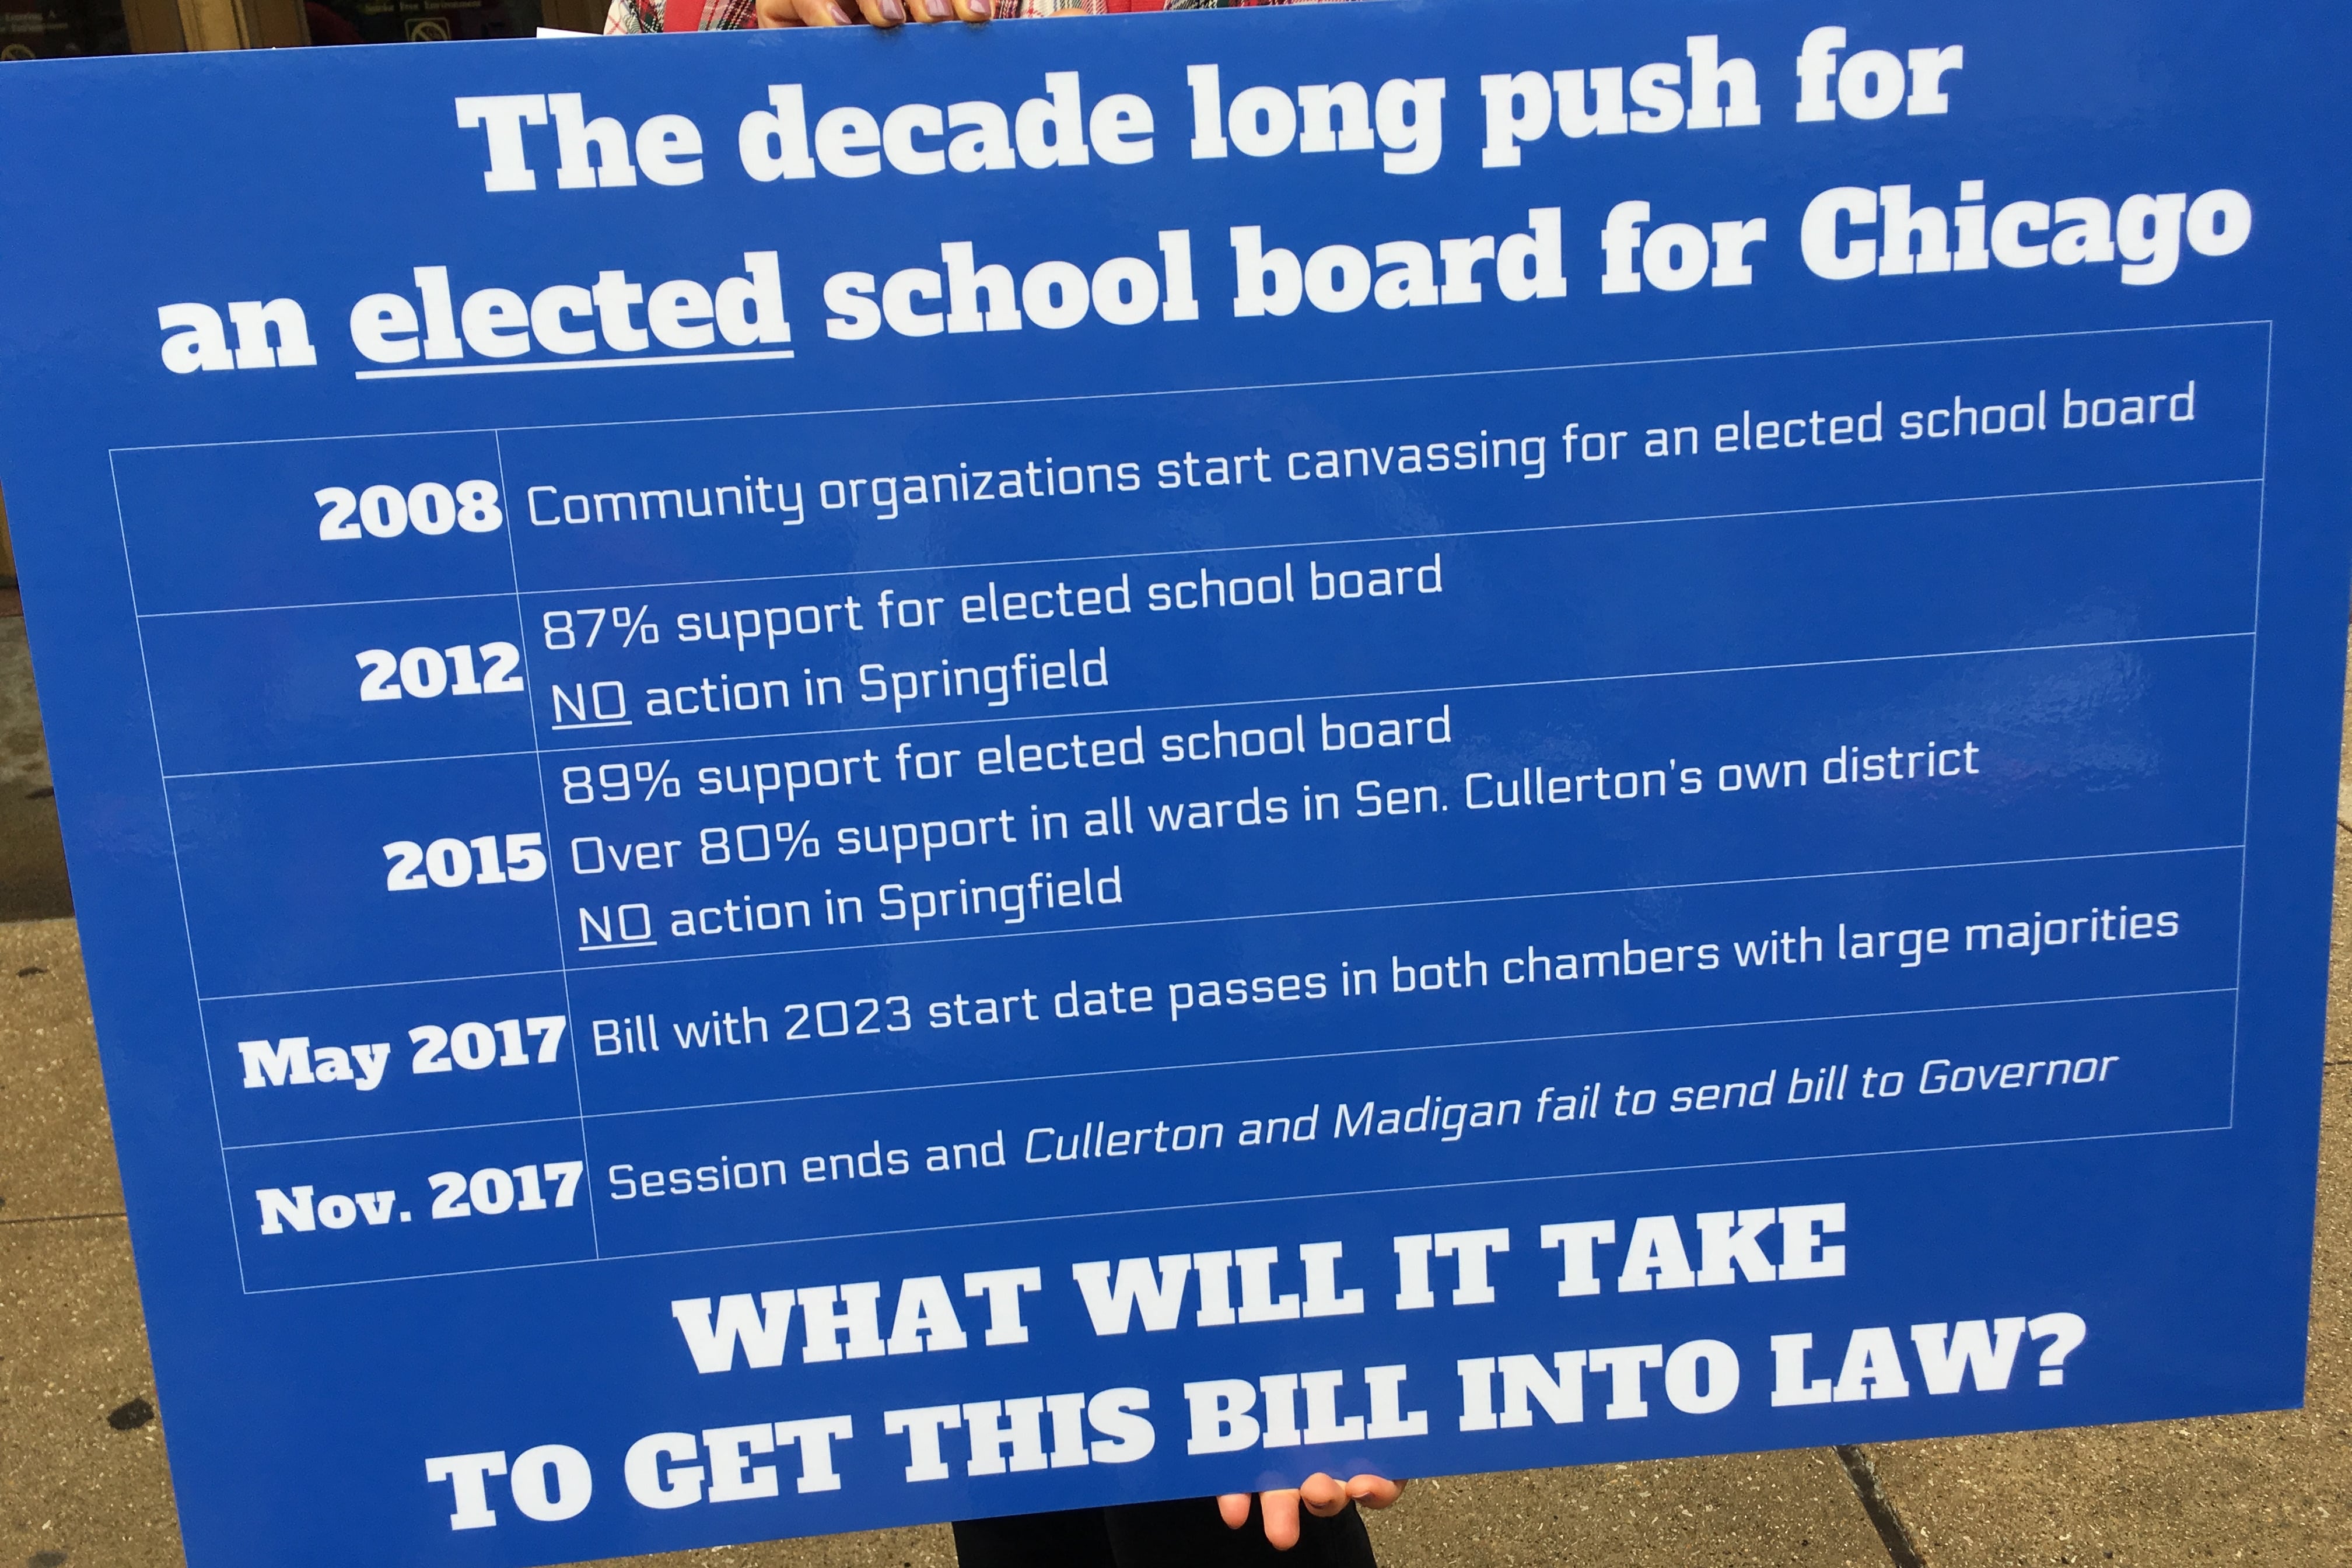 A sign advocating for an elected school board in Chicago reads, “The decade long push for an elected school board in Chicago,” with events from five dates, and “What will it take to get this bill into law.”